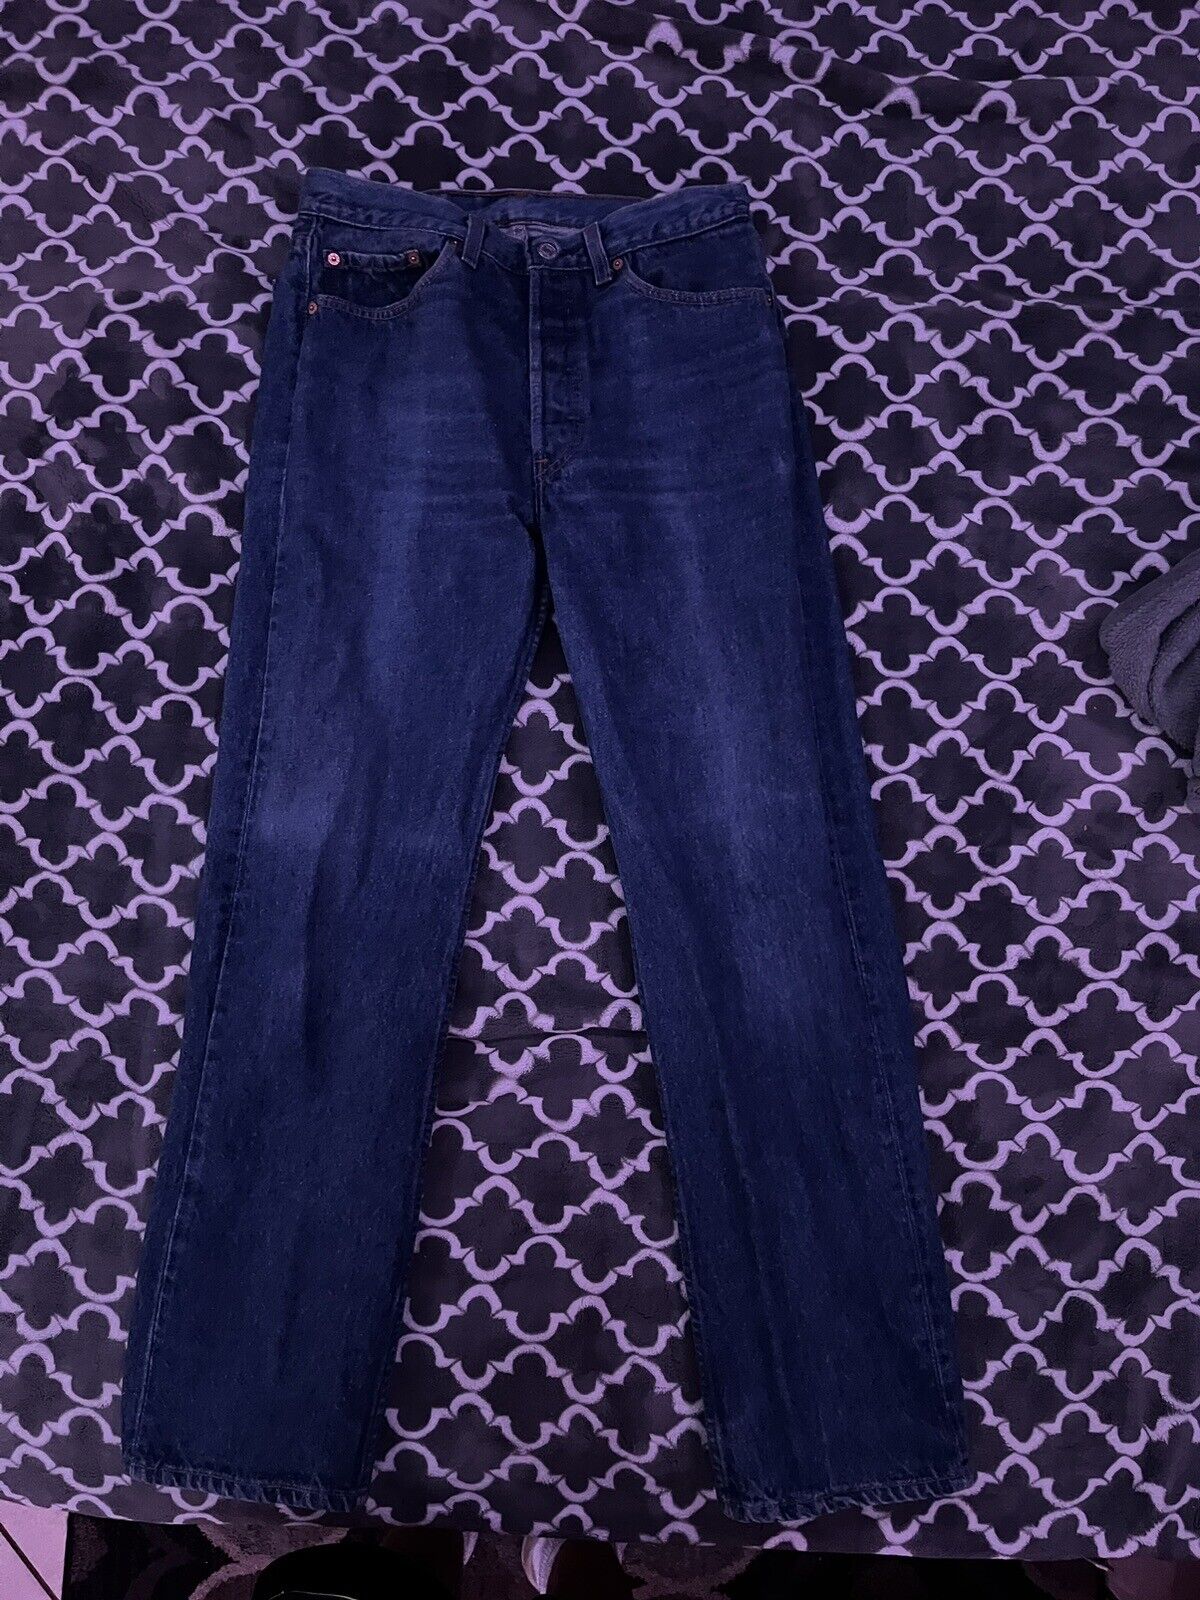 vintage levis 501 made in usa - image 2